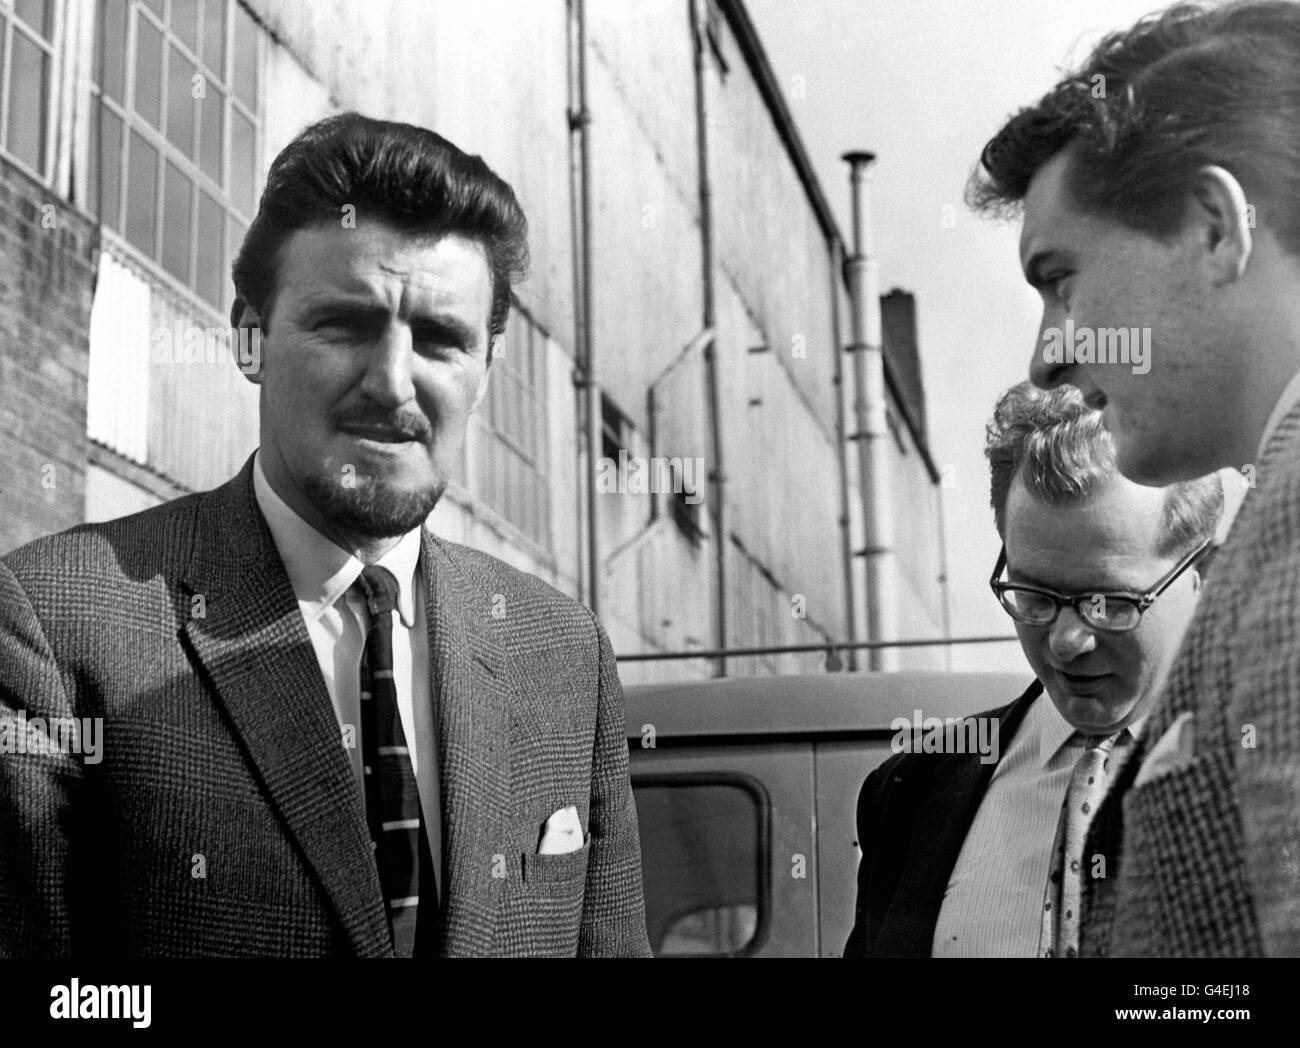 Coventry Manager Jimmy Hill back at the club talking about his kidnapping by local rag students. He said 'Six rag students came at night to my house and i agreed to go with them, under threat of being taken forcibly, and because it was for charity. I was released after agreeing to three things, not to disclose names or where i was kept, to choose the beauty queen at tonight's rag ball, and to allow drum majorettes to perform at the ground for charity'. Immediately he was released, Mr Hill rang the police from a phonebox to tell them he was safe. Stock Photo